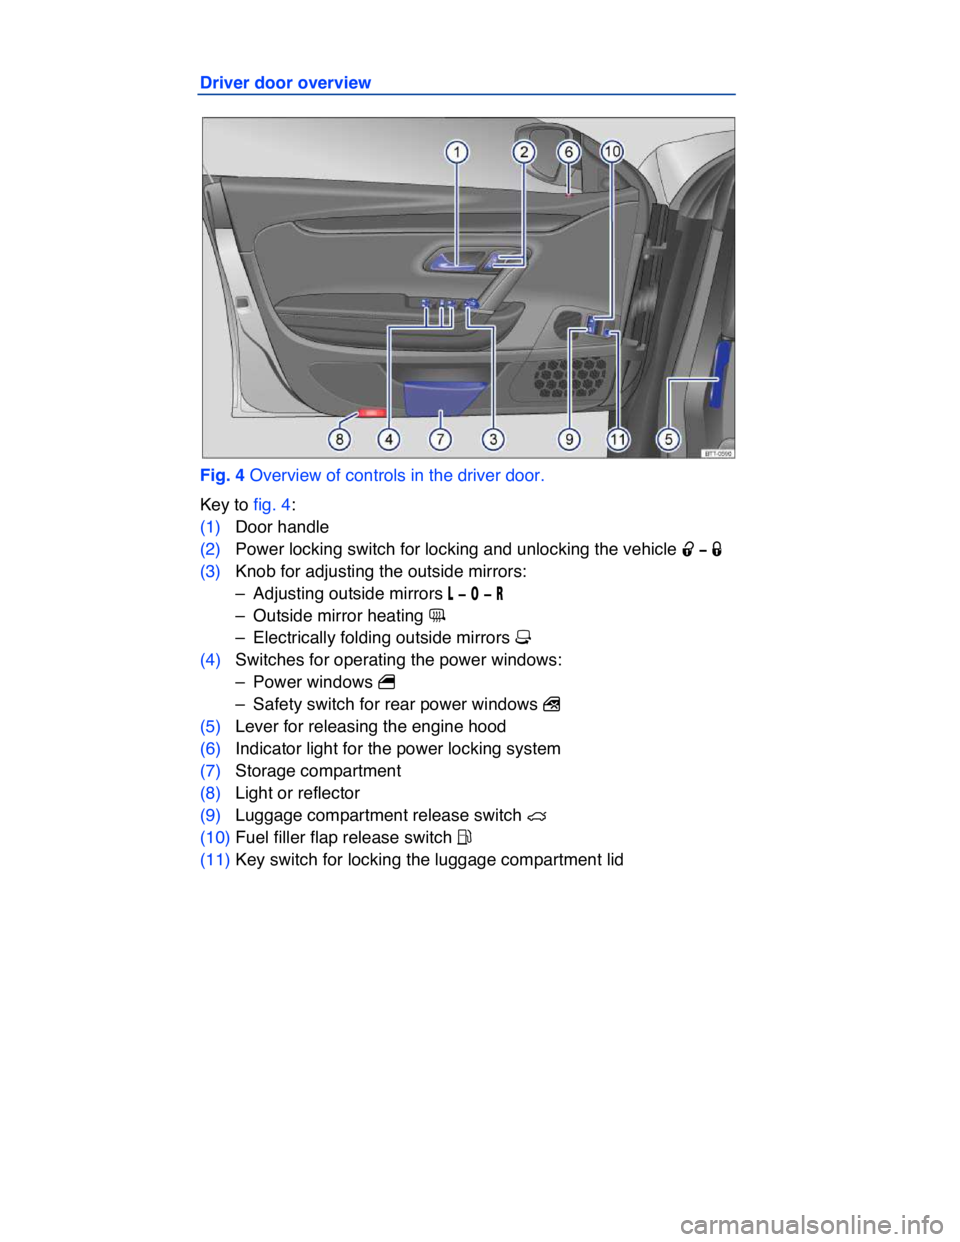 VOLKSWAGEN CC 2013  Owners Manual  
Driver door overview 
 
Fig. 4 Overview of controls in the driver door. 
Key to fig. 4: 
(1) Door handle  
(2) Power locking switch for locking and unlocking the vehicle �0 �